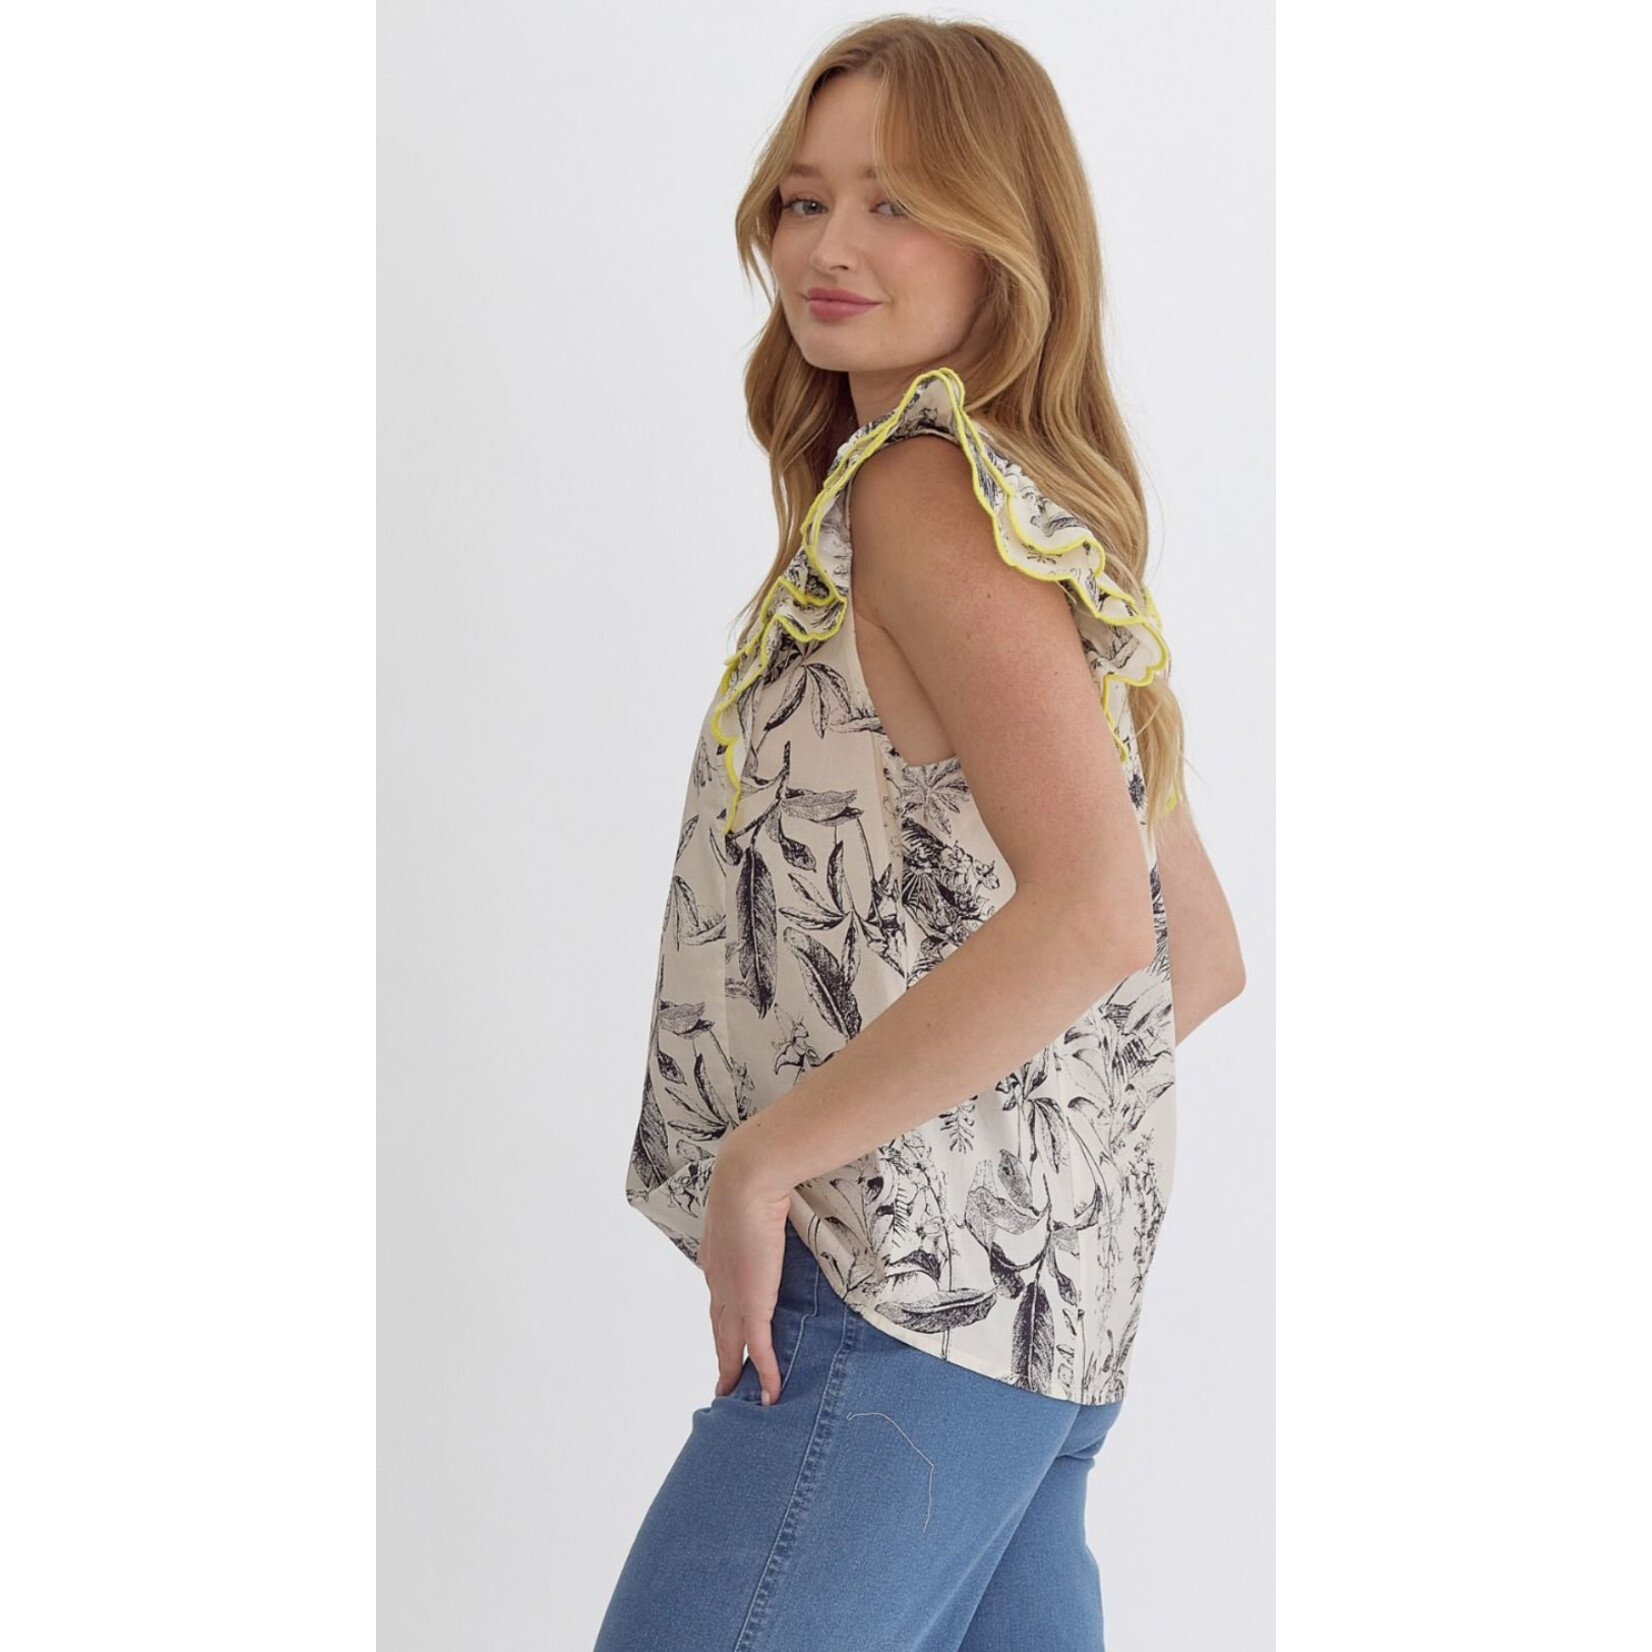 The Melissa Top